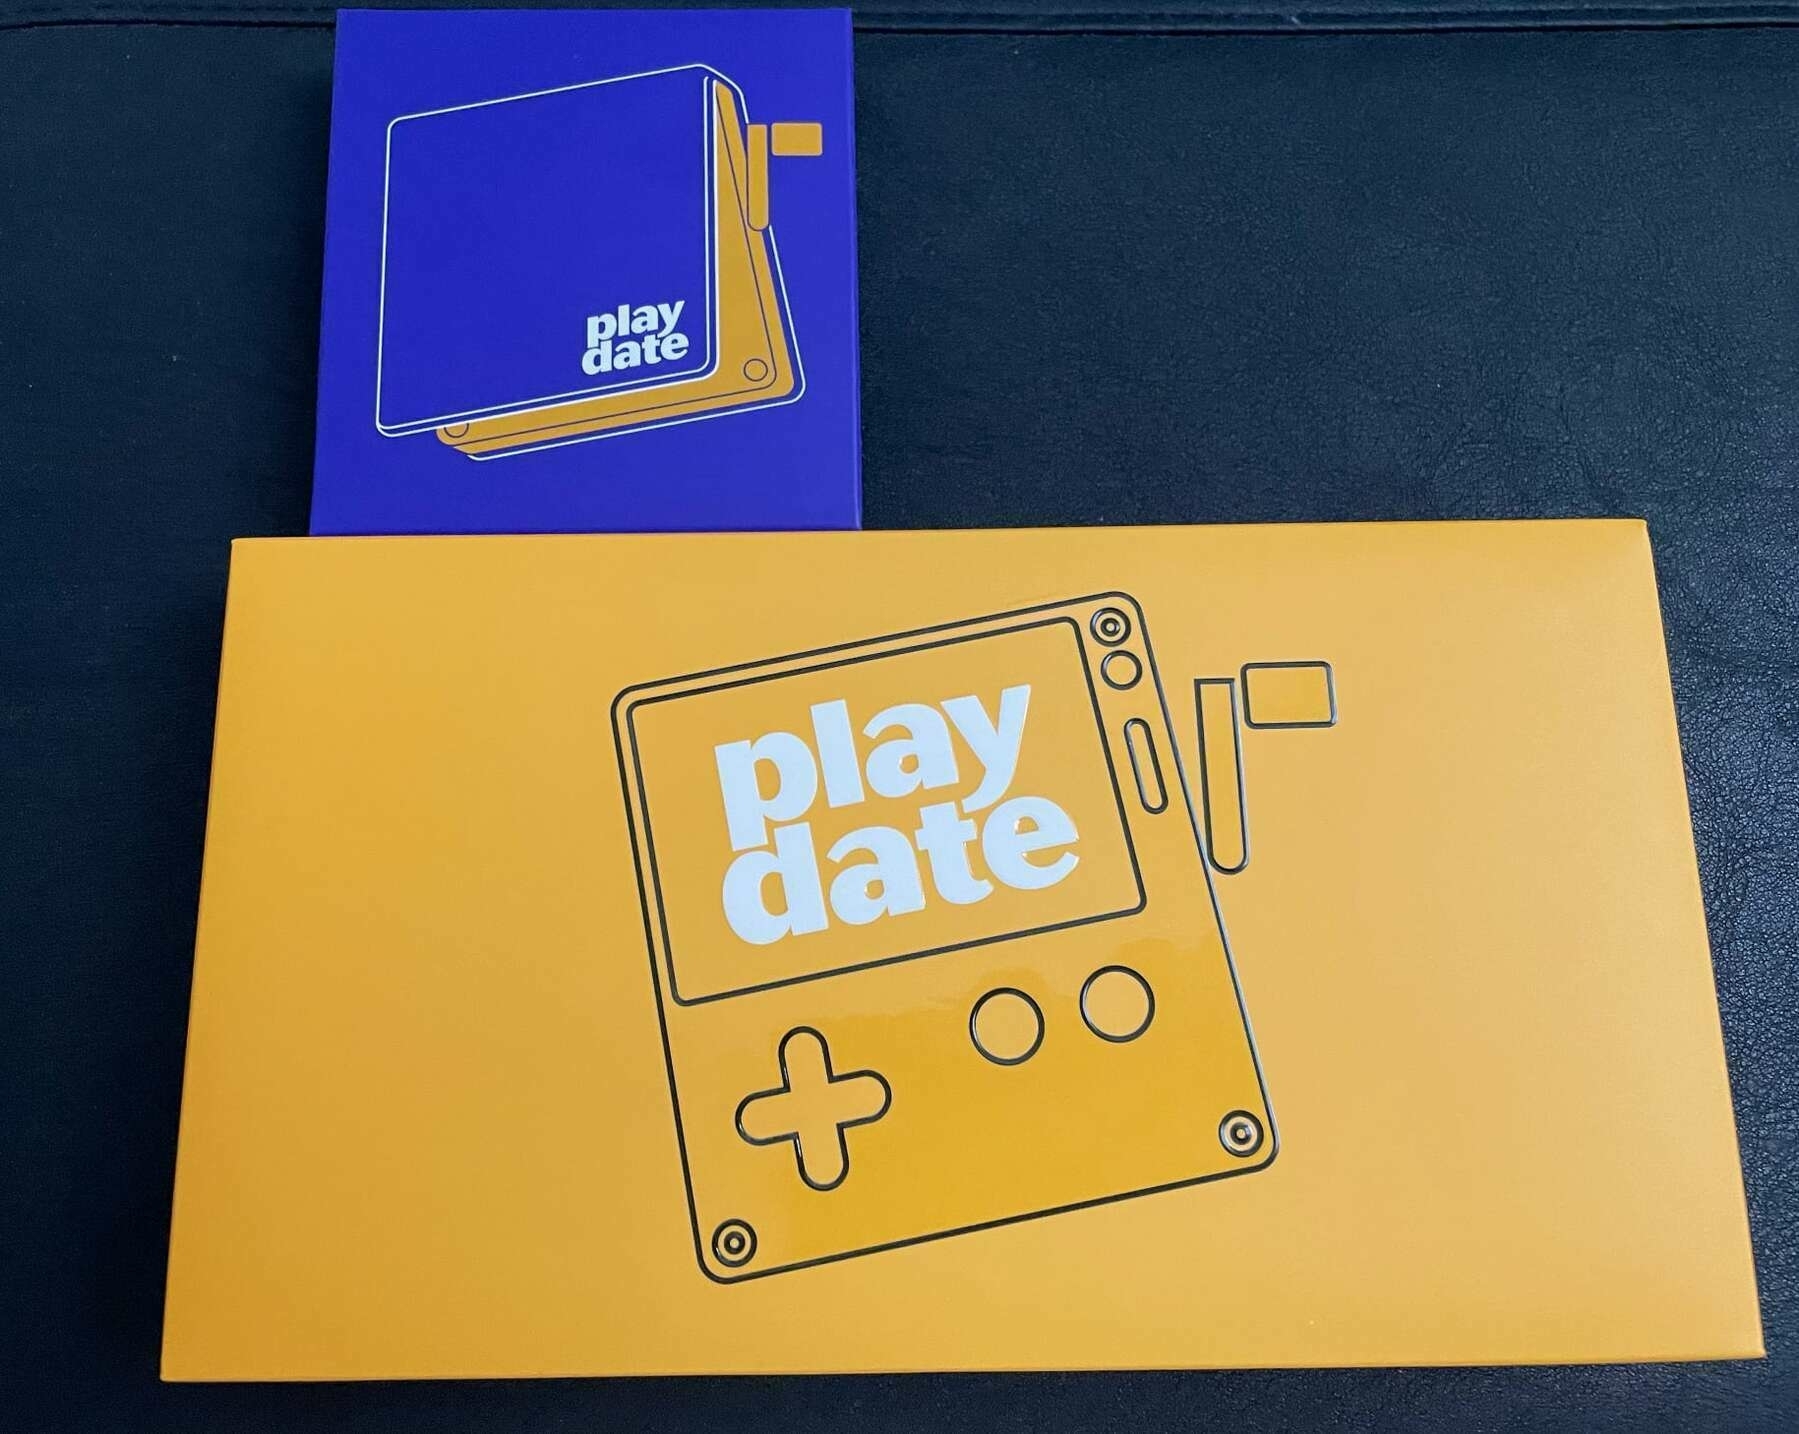 boxed Panic! play date console [yellow with white lettering] and cover [purple with white lettering] on a black background